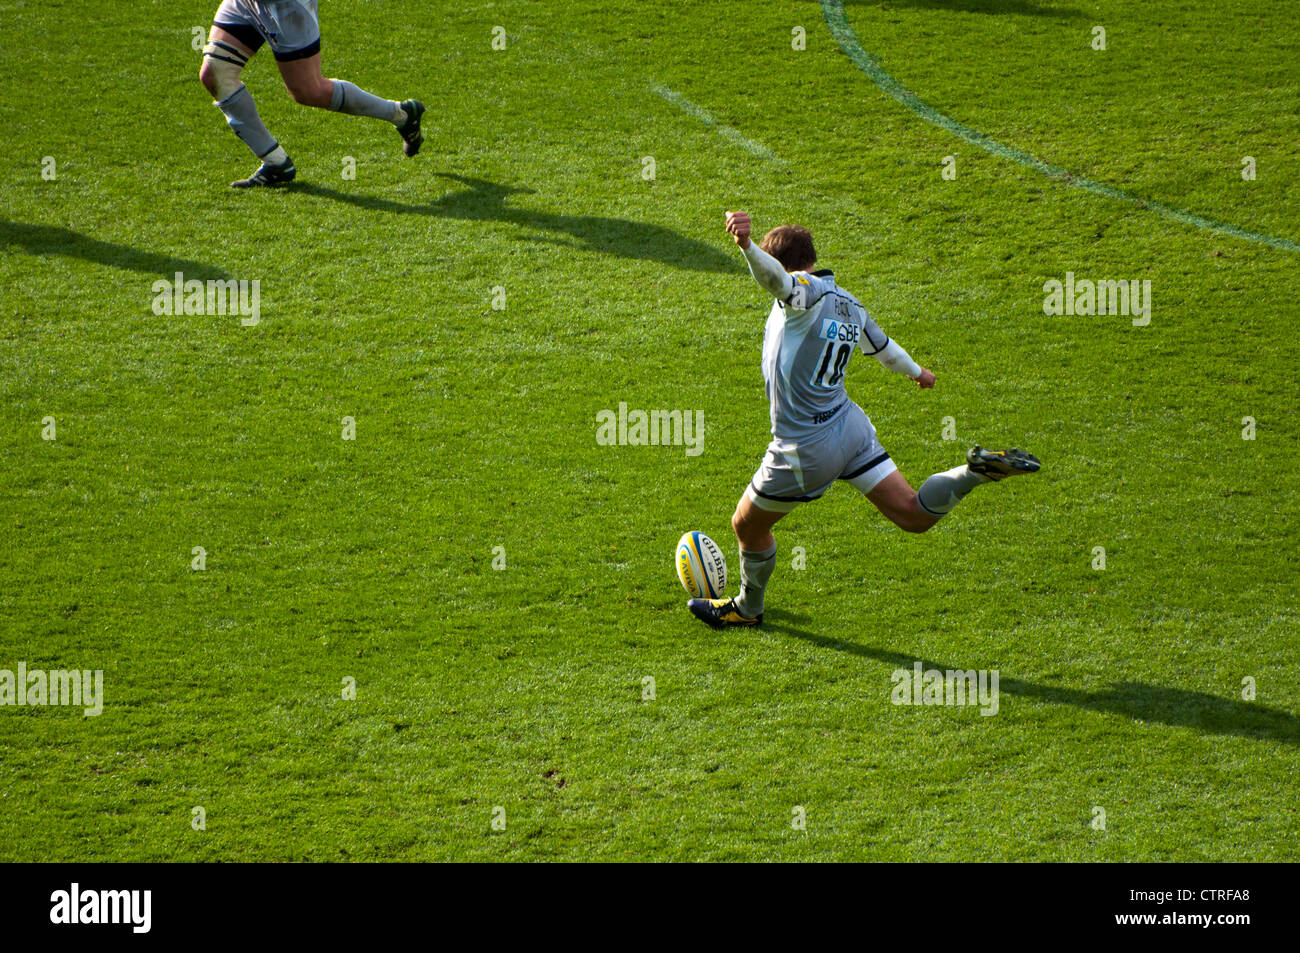 Toby Flood converting a try for The Leicester Tigers against The London Irish 25th March 2012 Stock Photo